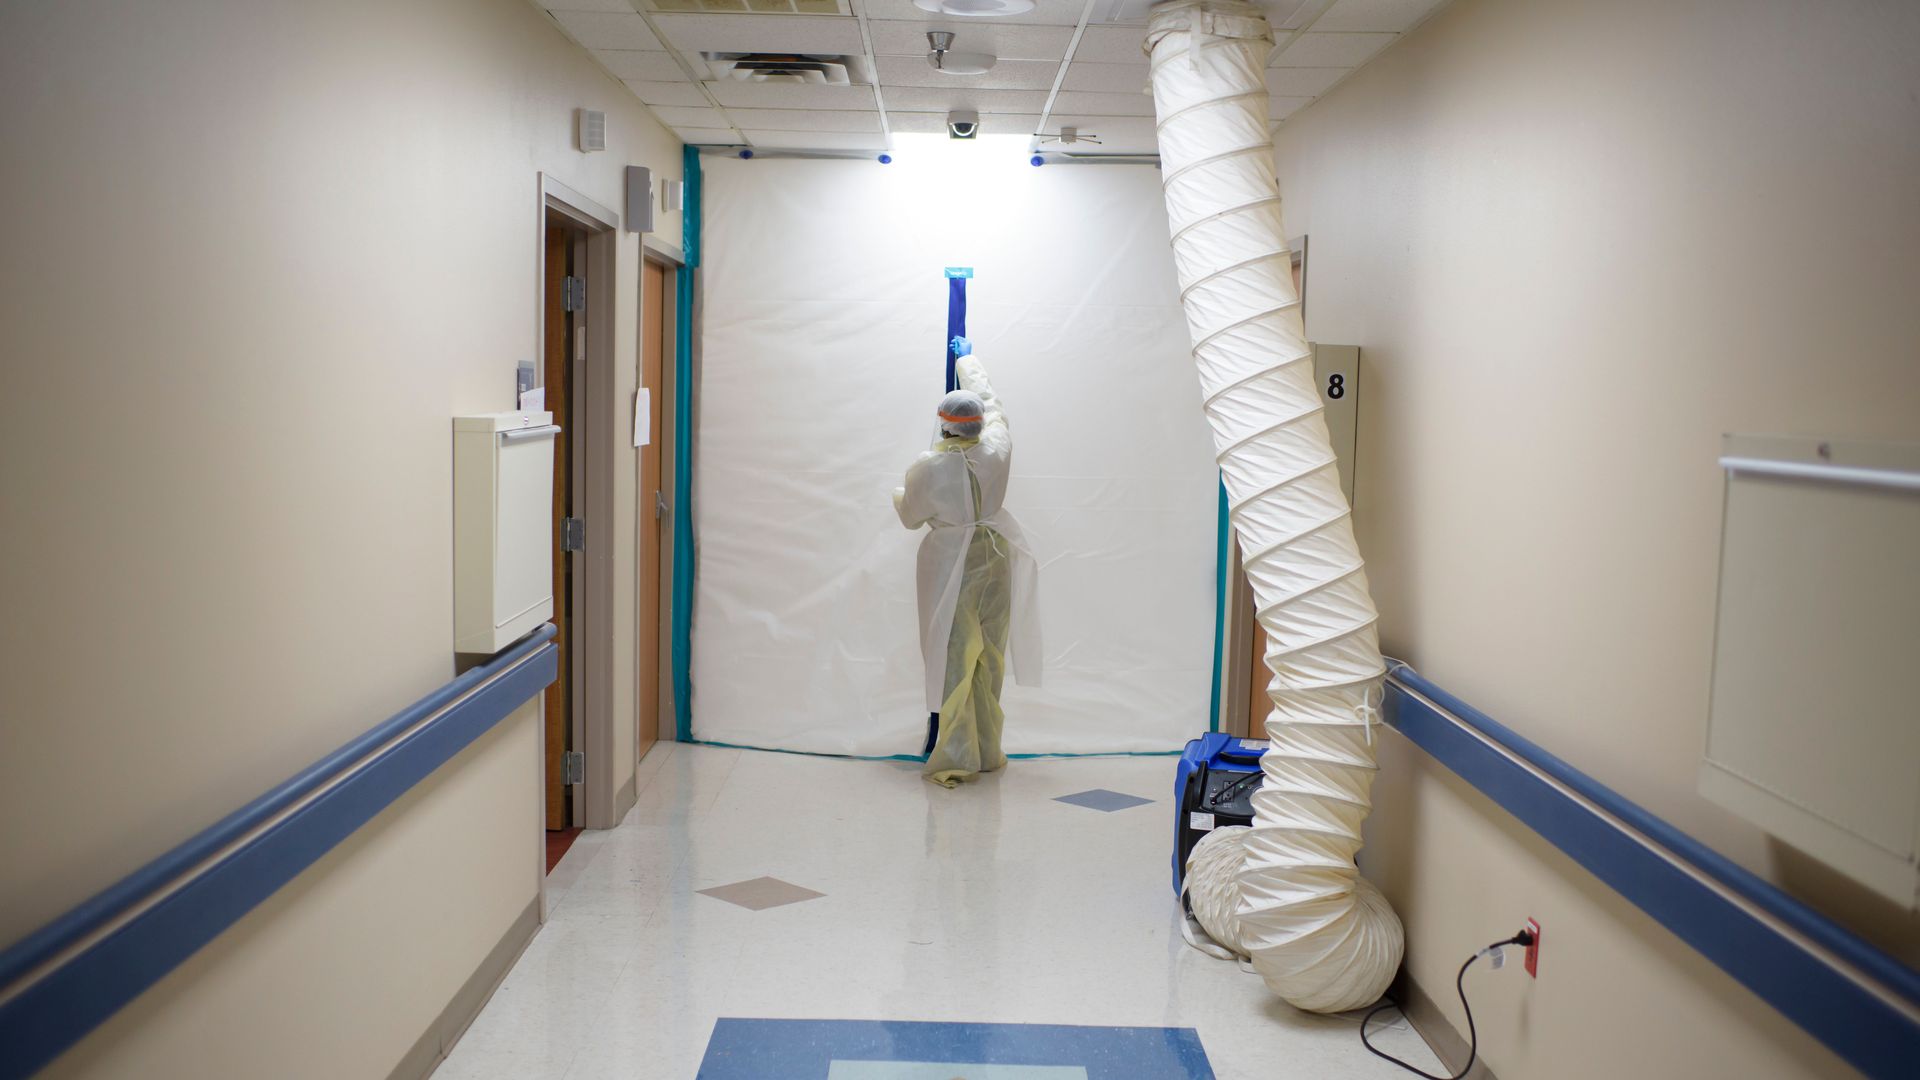 A worker in personal protective gear zips off a COVID-19 unit in a hospital.